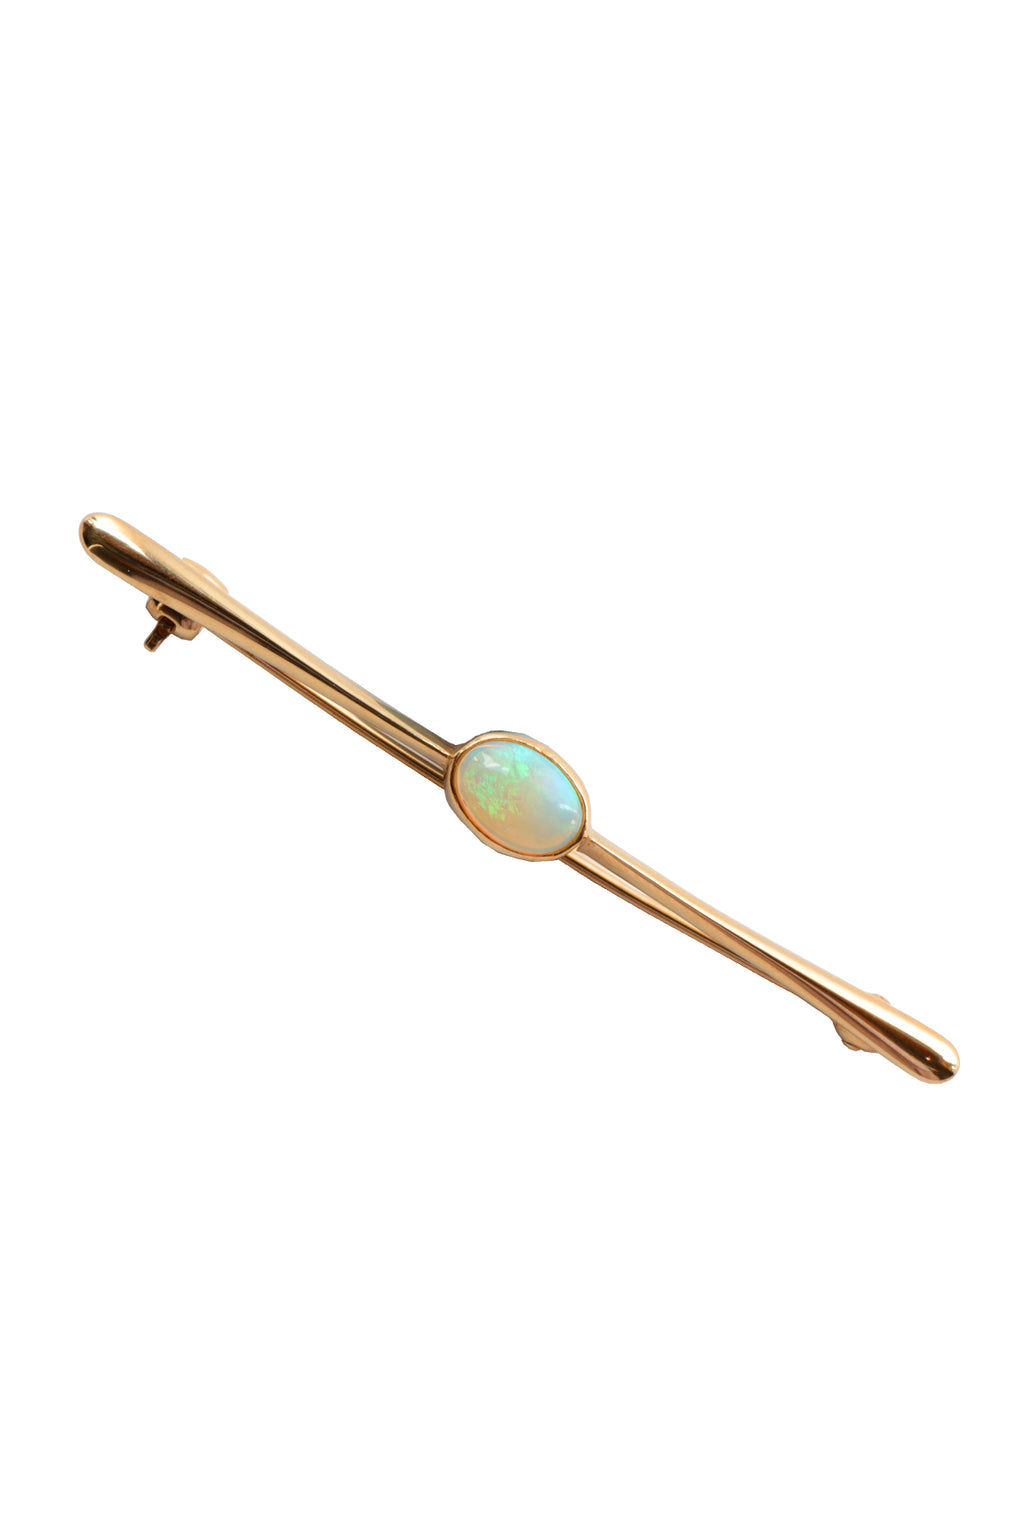 9ct Gold Bar Brooch with Opal